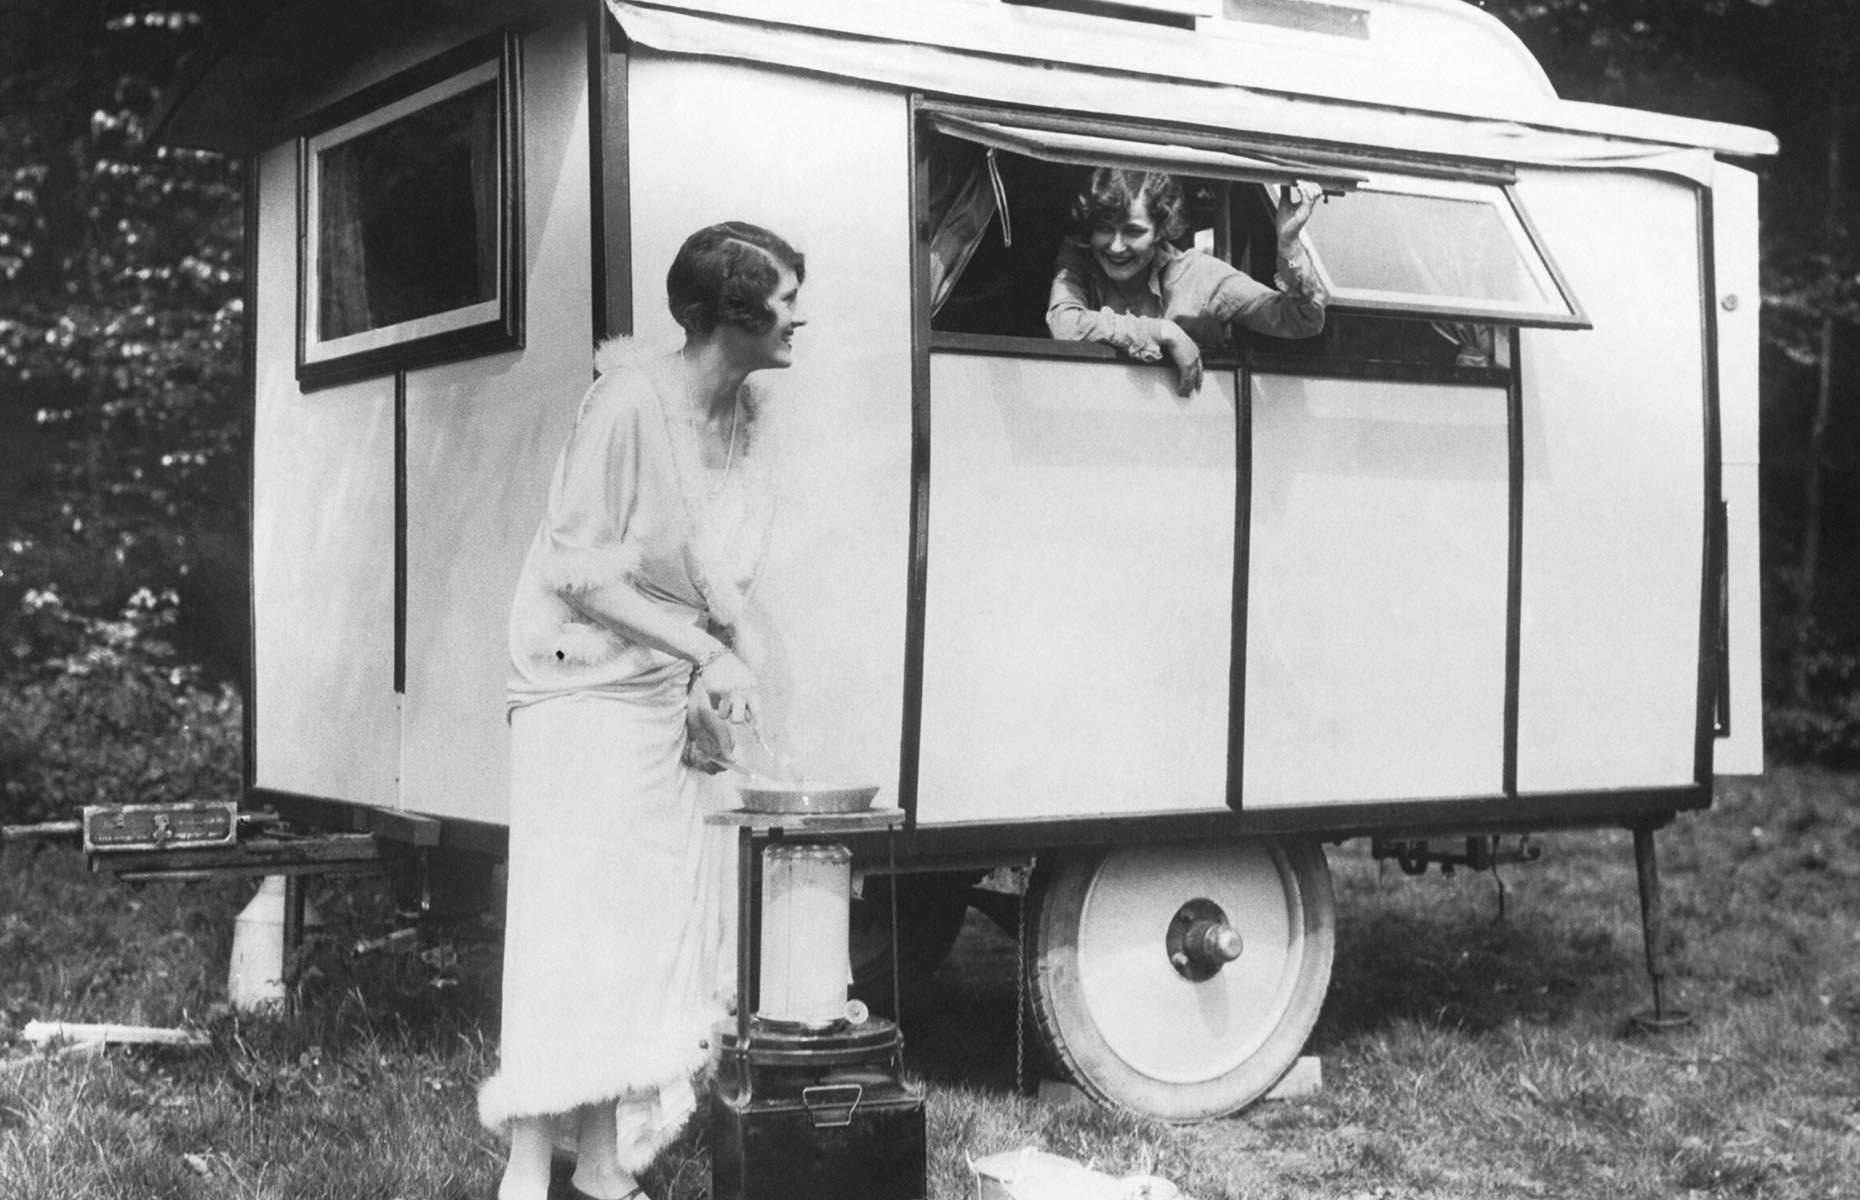 While early RVs and touring cars remained incredibly expensive in the early 1900s (and not everyone could make their own), the trailer grew in popularity. America's car industry boomed in the Roaring Twenties and the trailer represented a portable home-from-home with varying levels of creature comforts. Two women enjoy their trailer vacation in this 1920s shot.